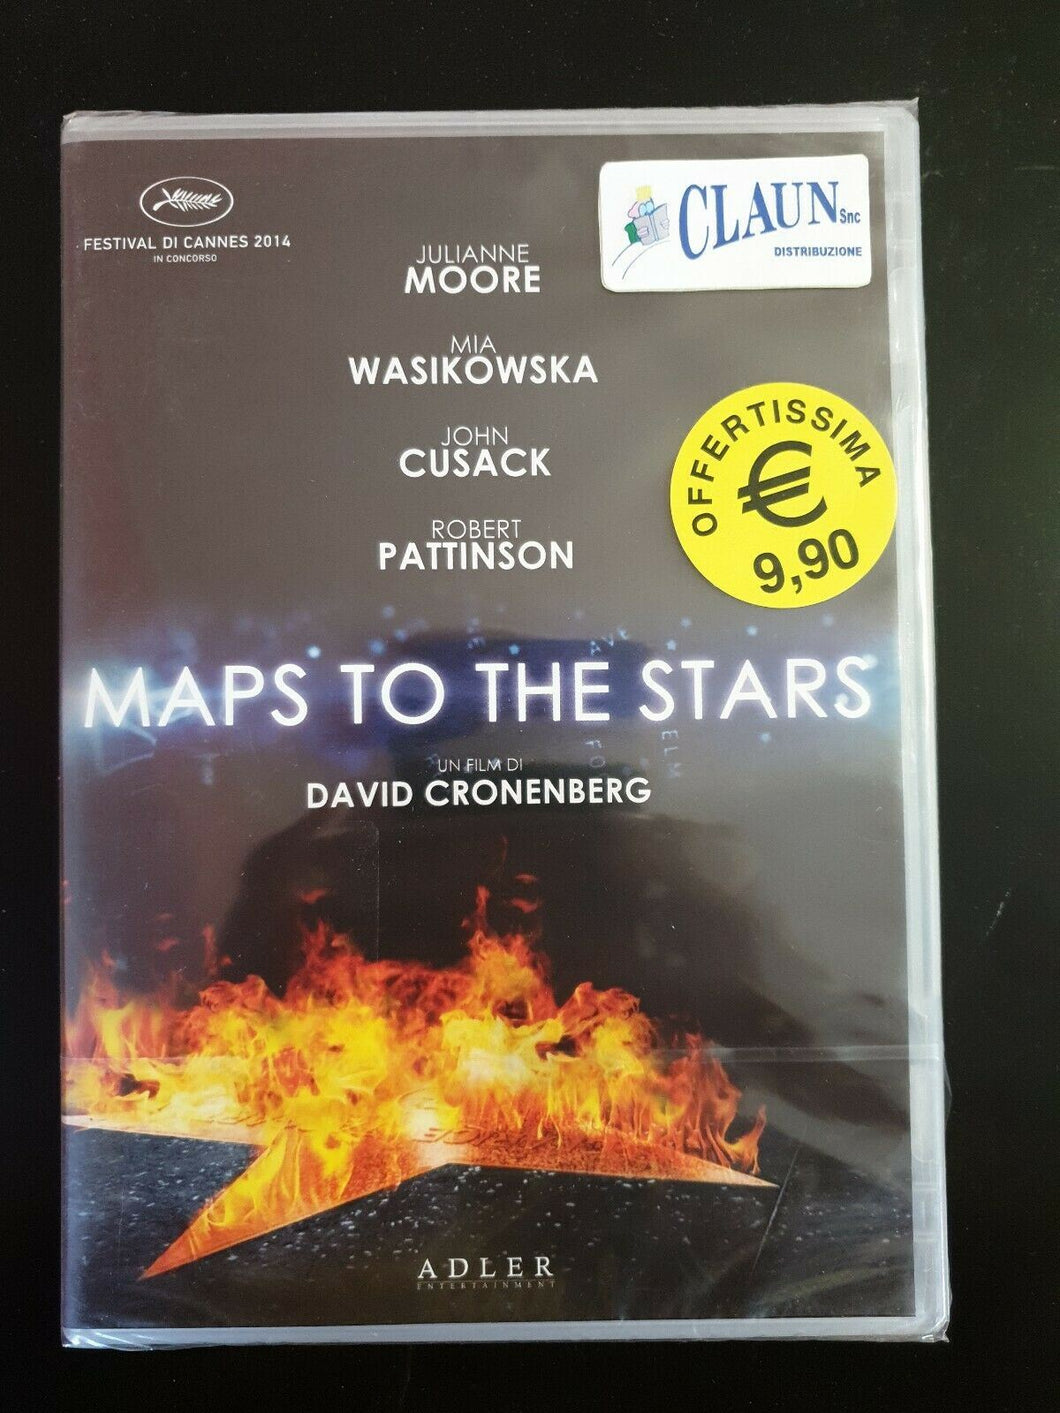 MAPS TO THE STARS DVD Nuovo